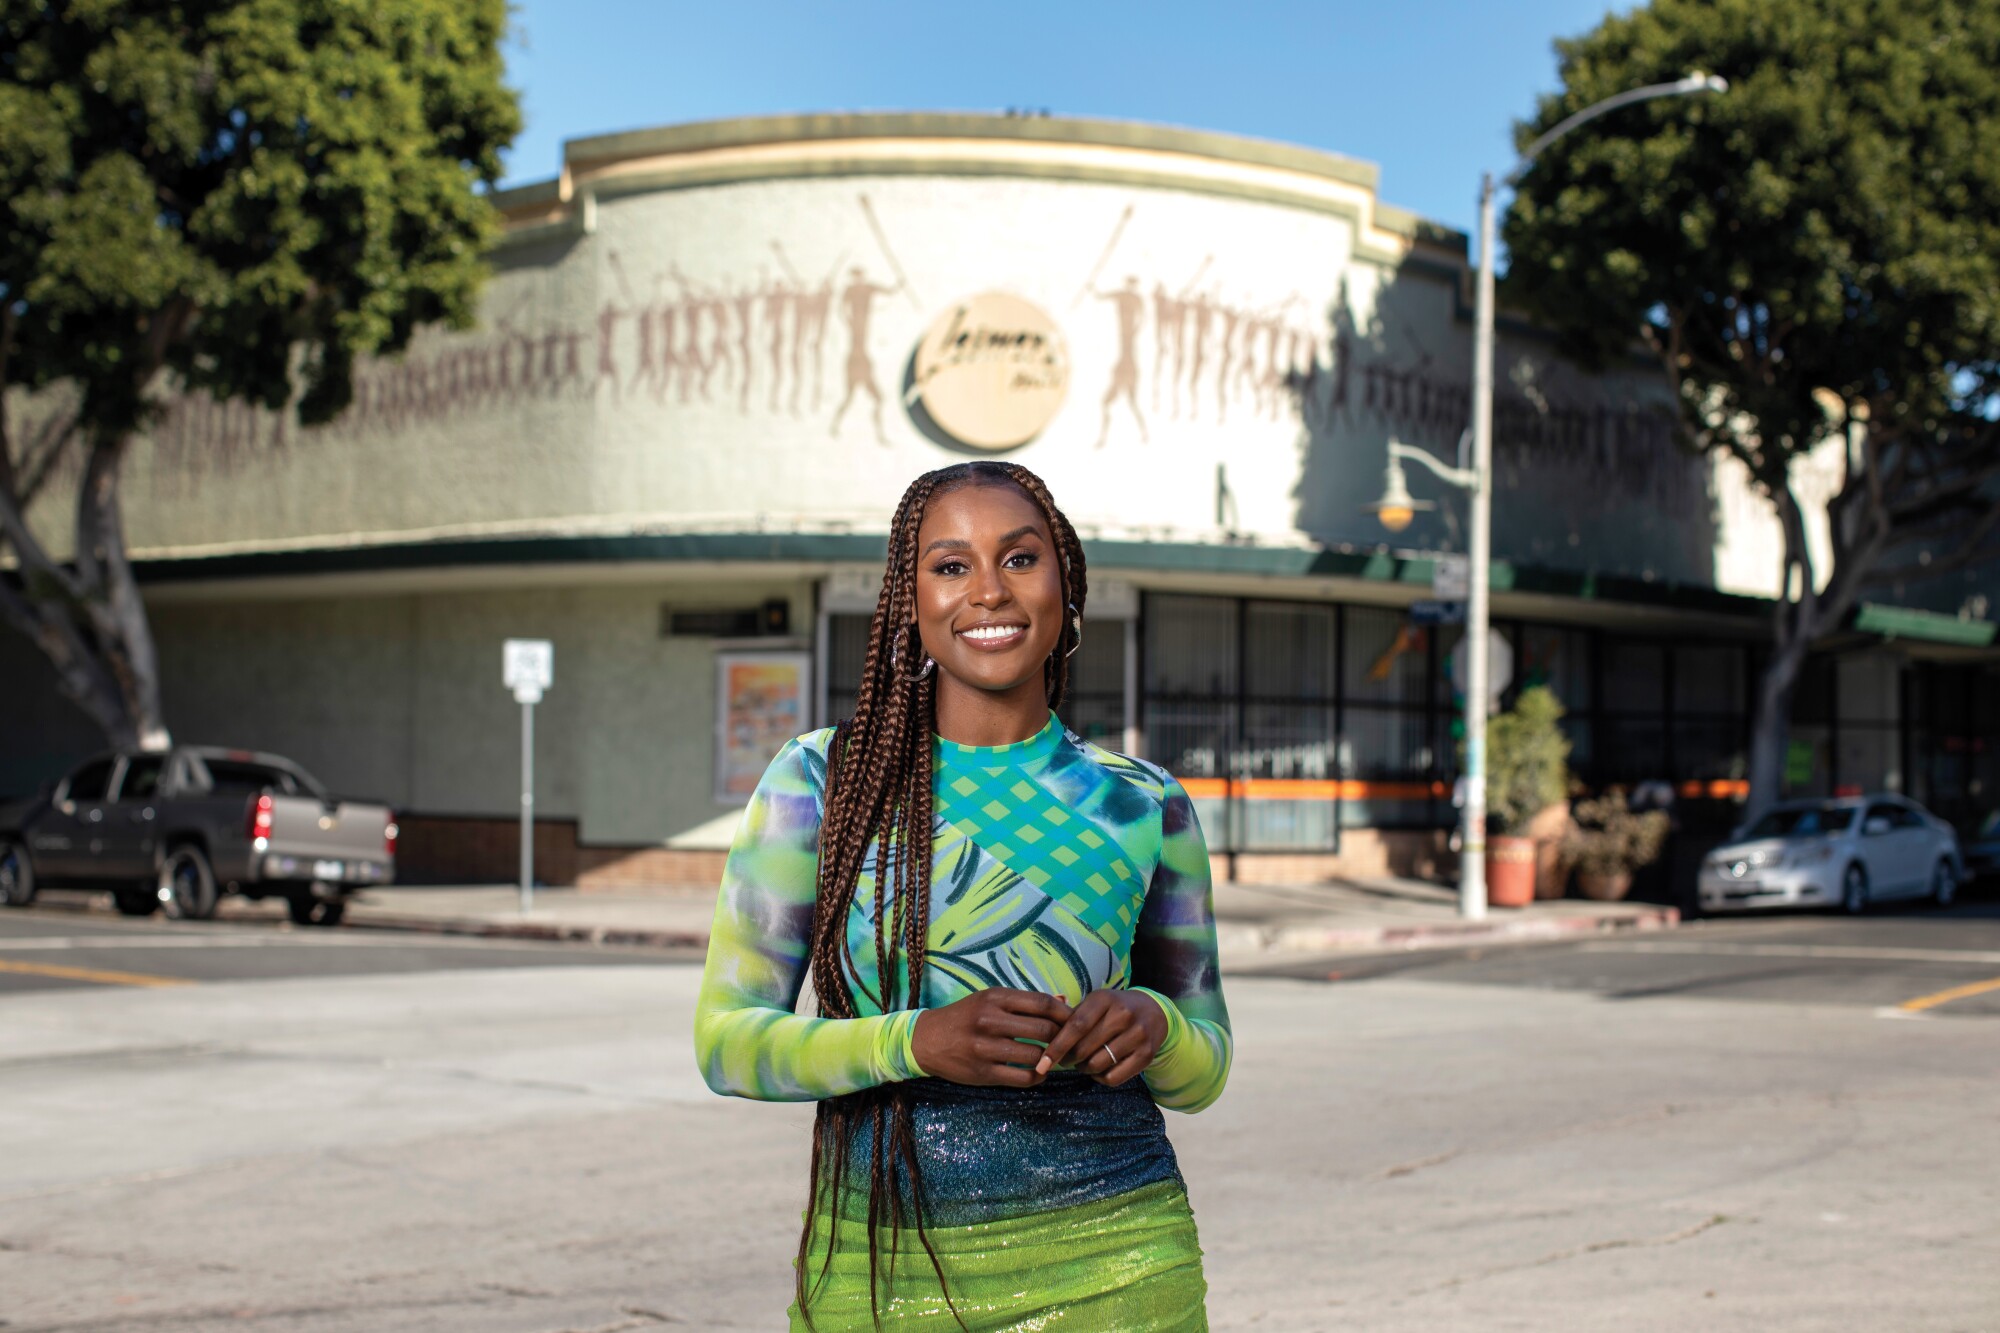 Issa Rae, Photographed on Sunday, Nov. 14, 2021 in Los Angeles, CA. (Myung J. Chun / Los Angeles Times)